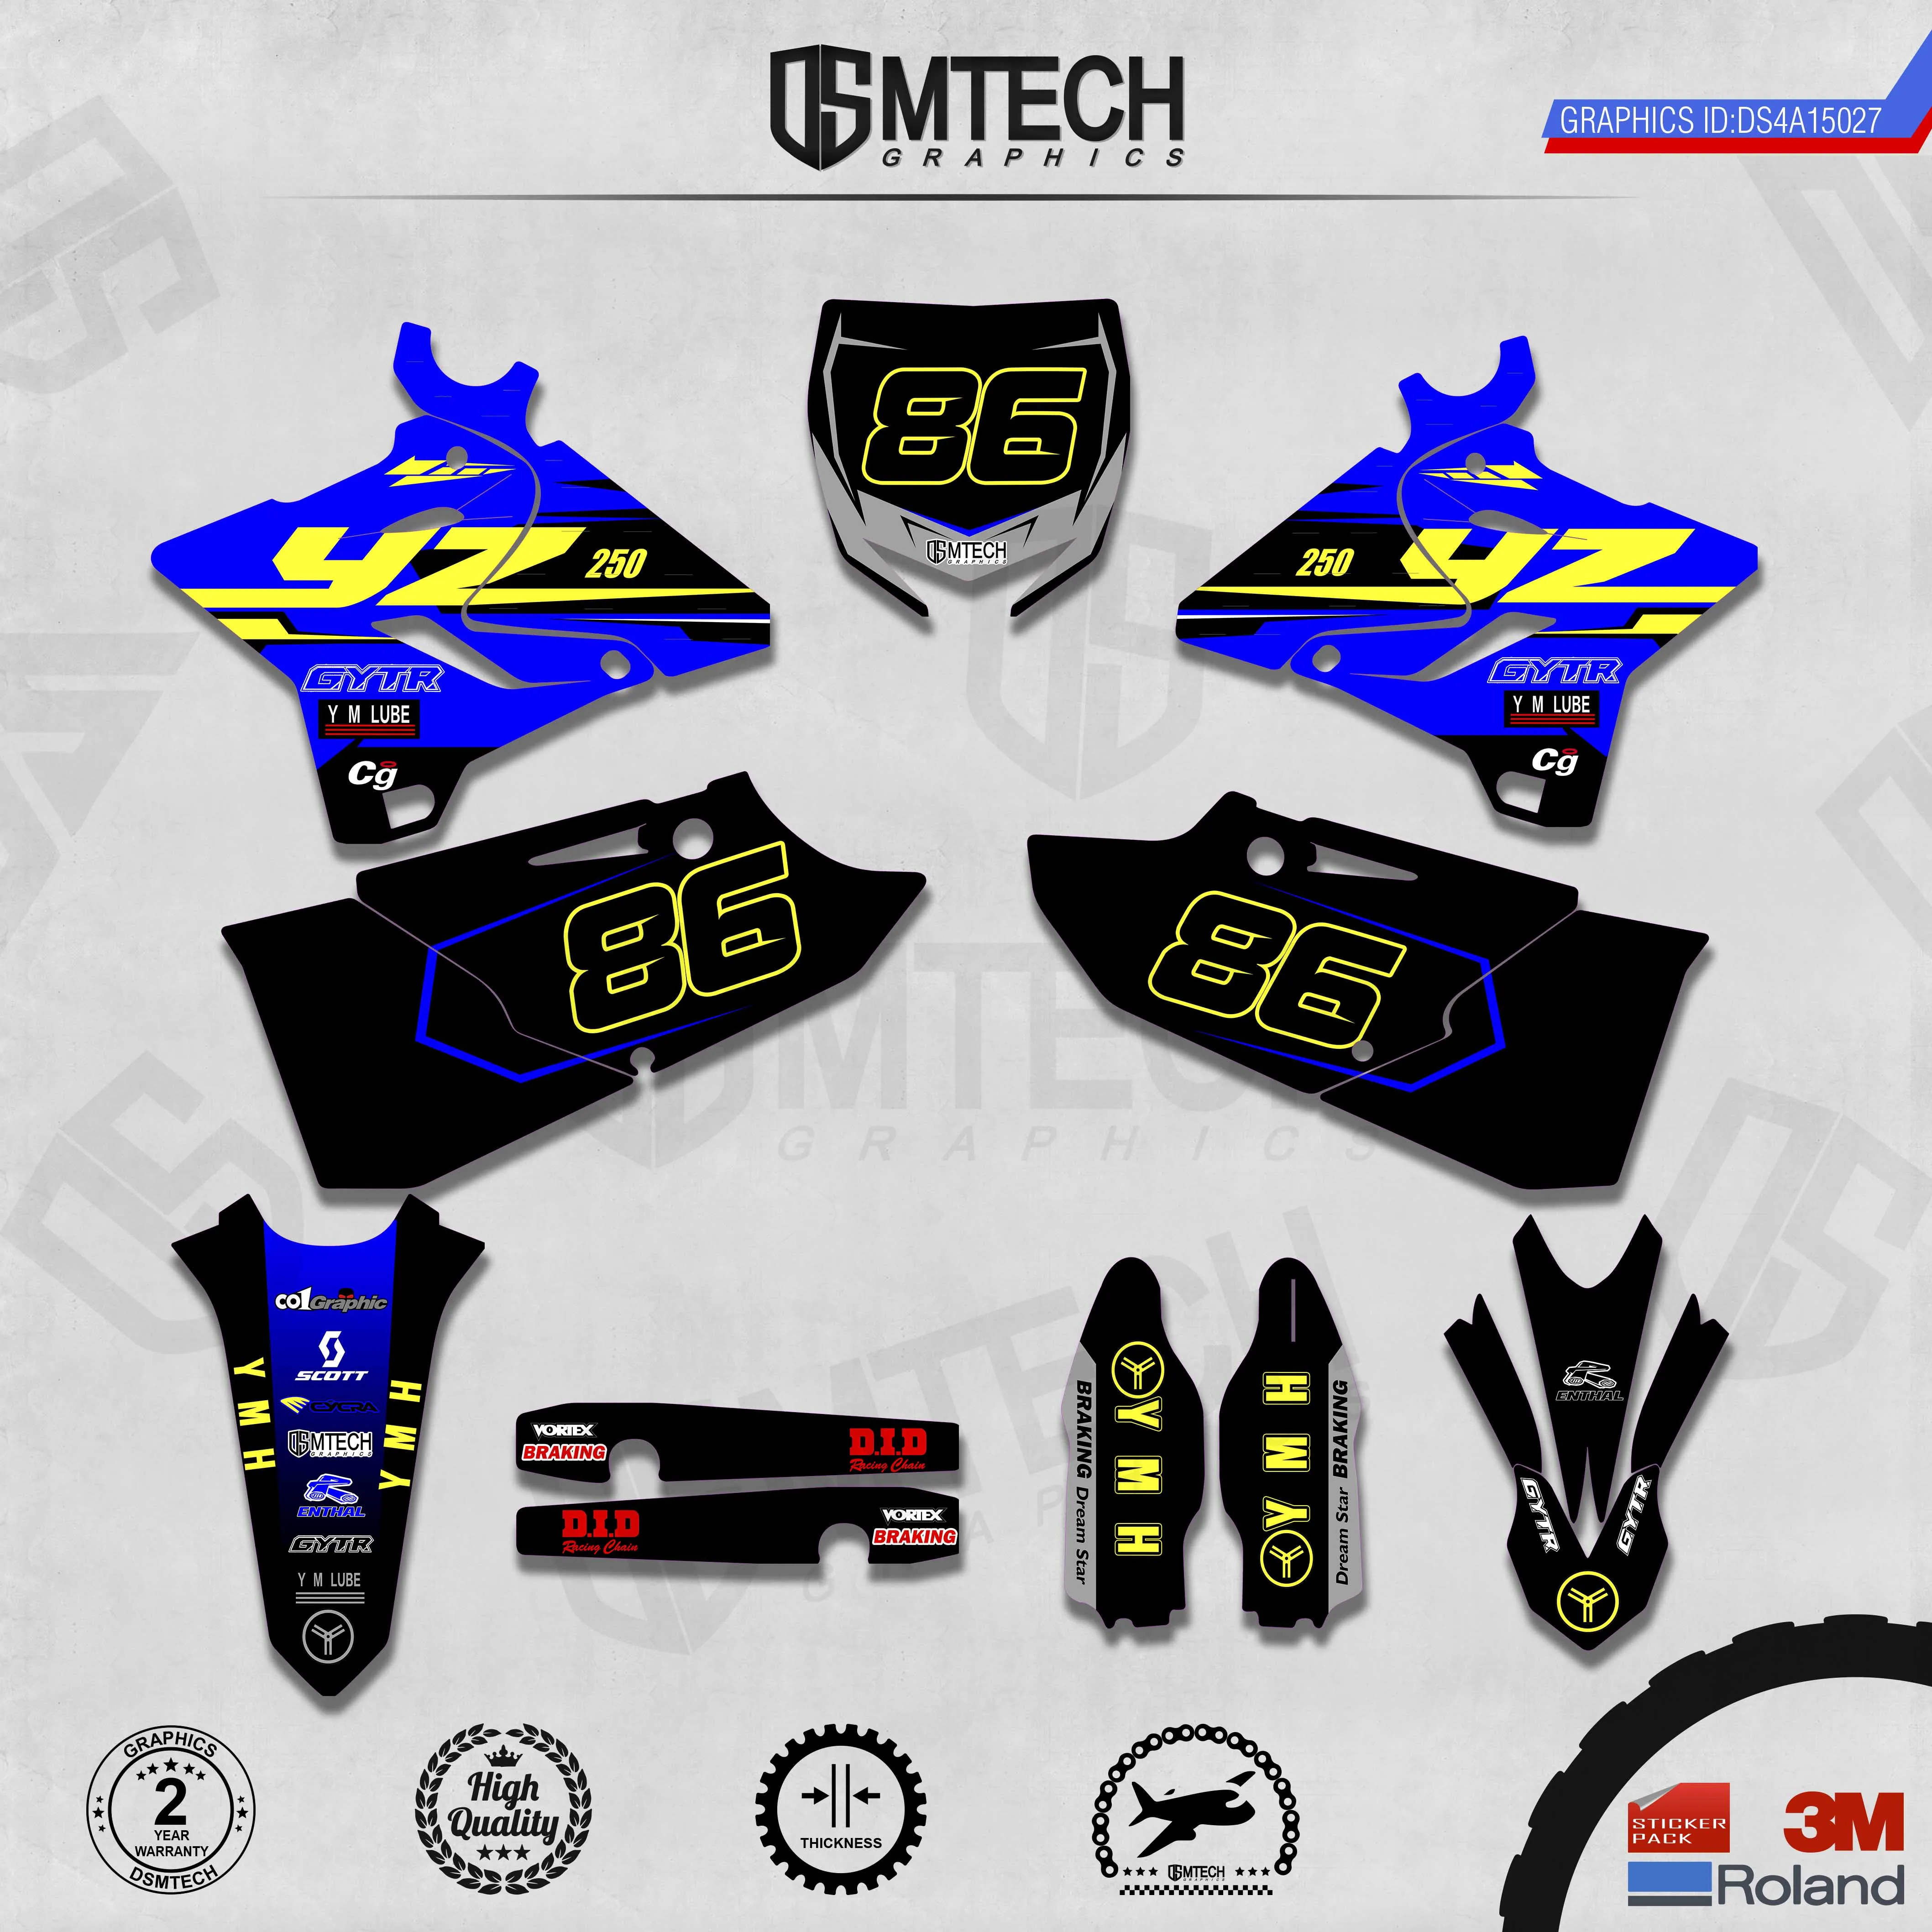 DSMTECH Customized Team Graphics Backgrounds Decals 3M Custom Stickers For   YZ125-250 Two Stroke 2015-2019  027 fila stroke 2 t31tm01807f148